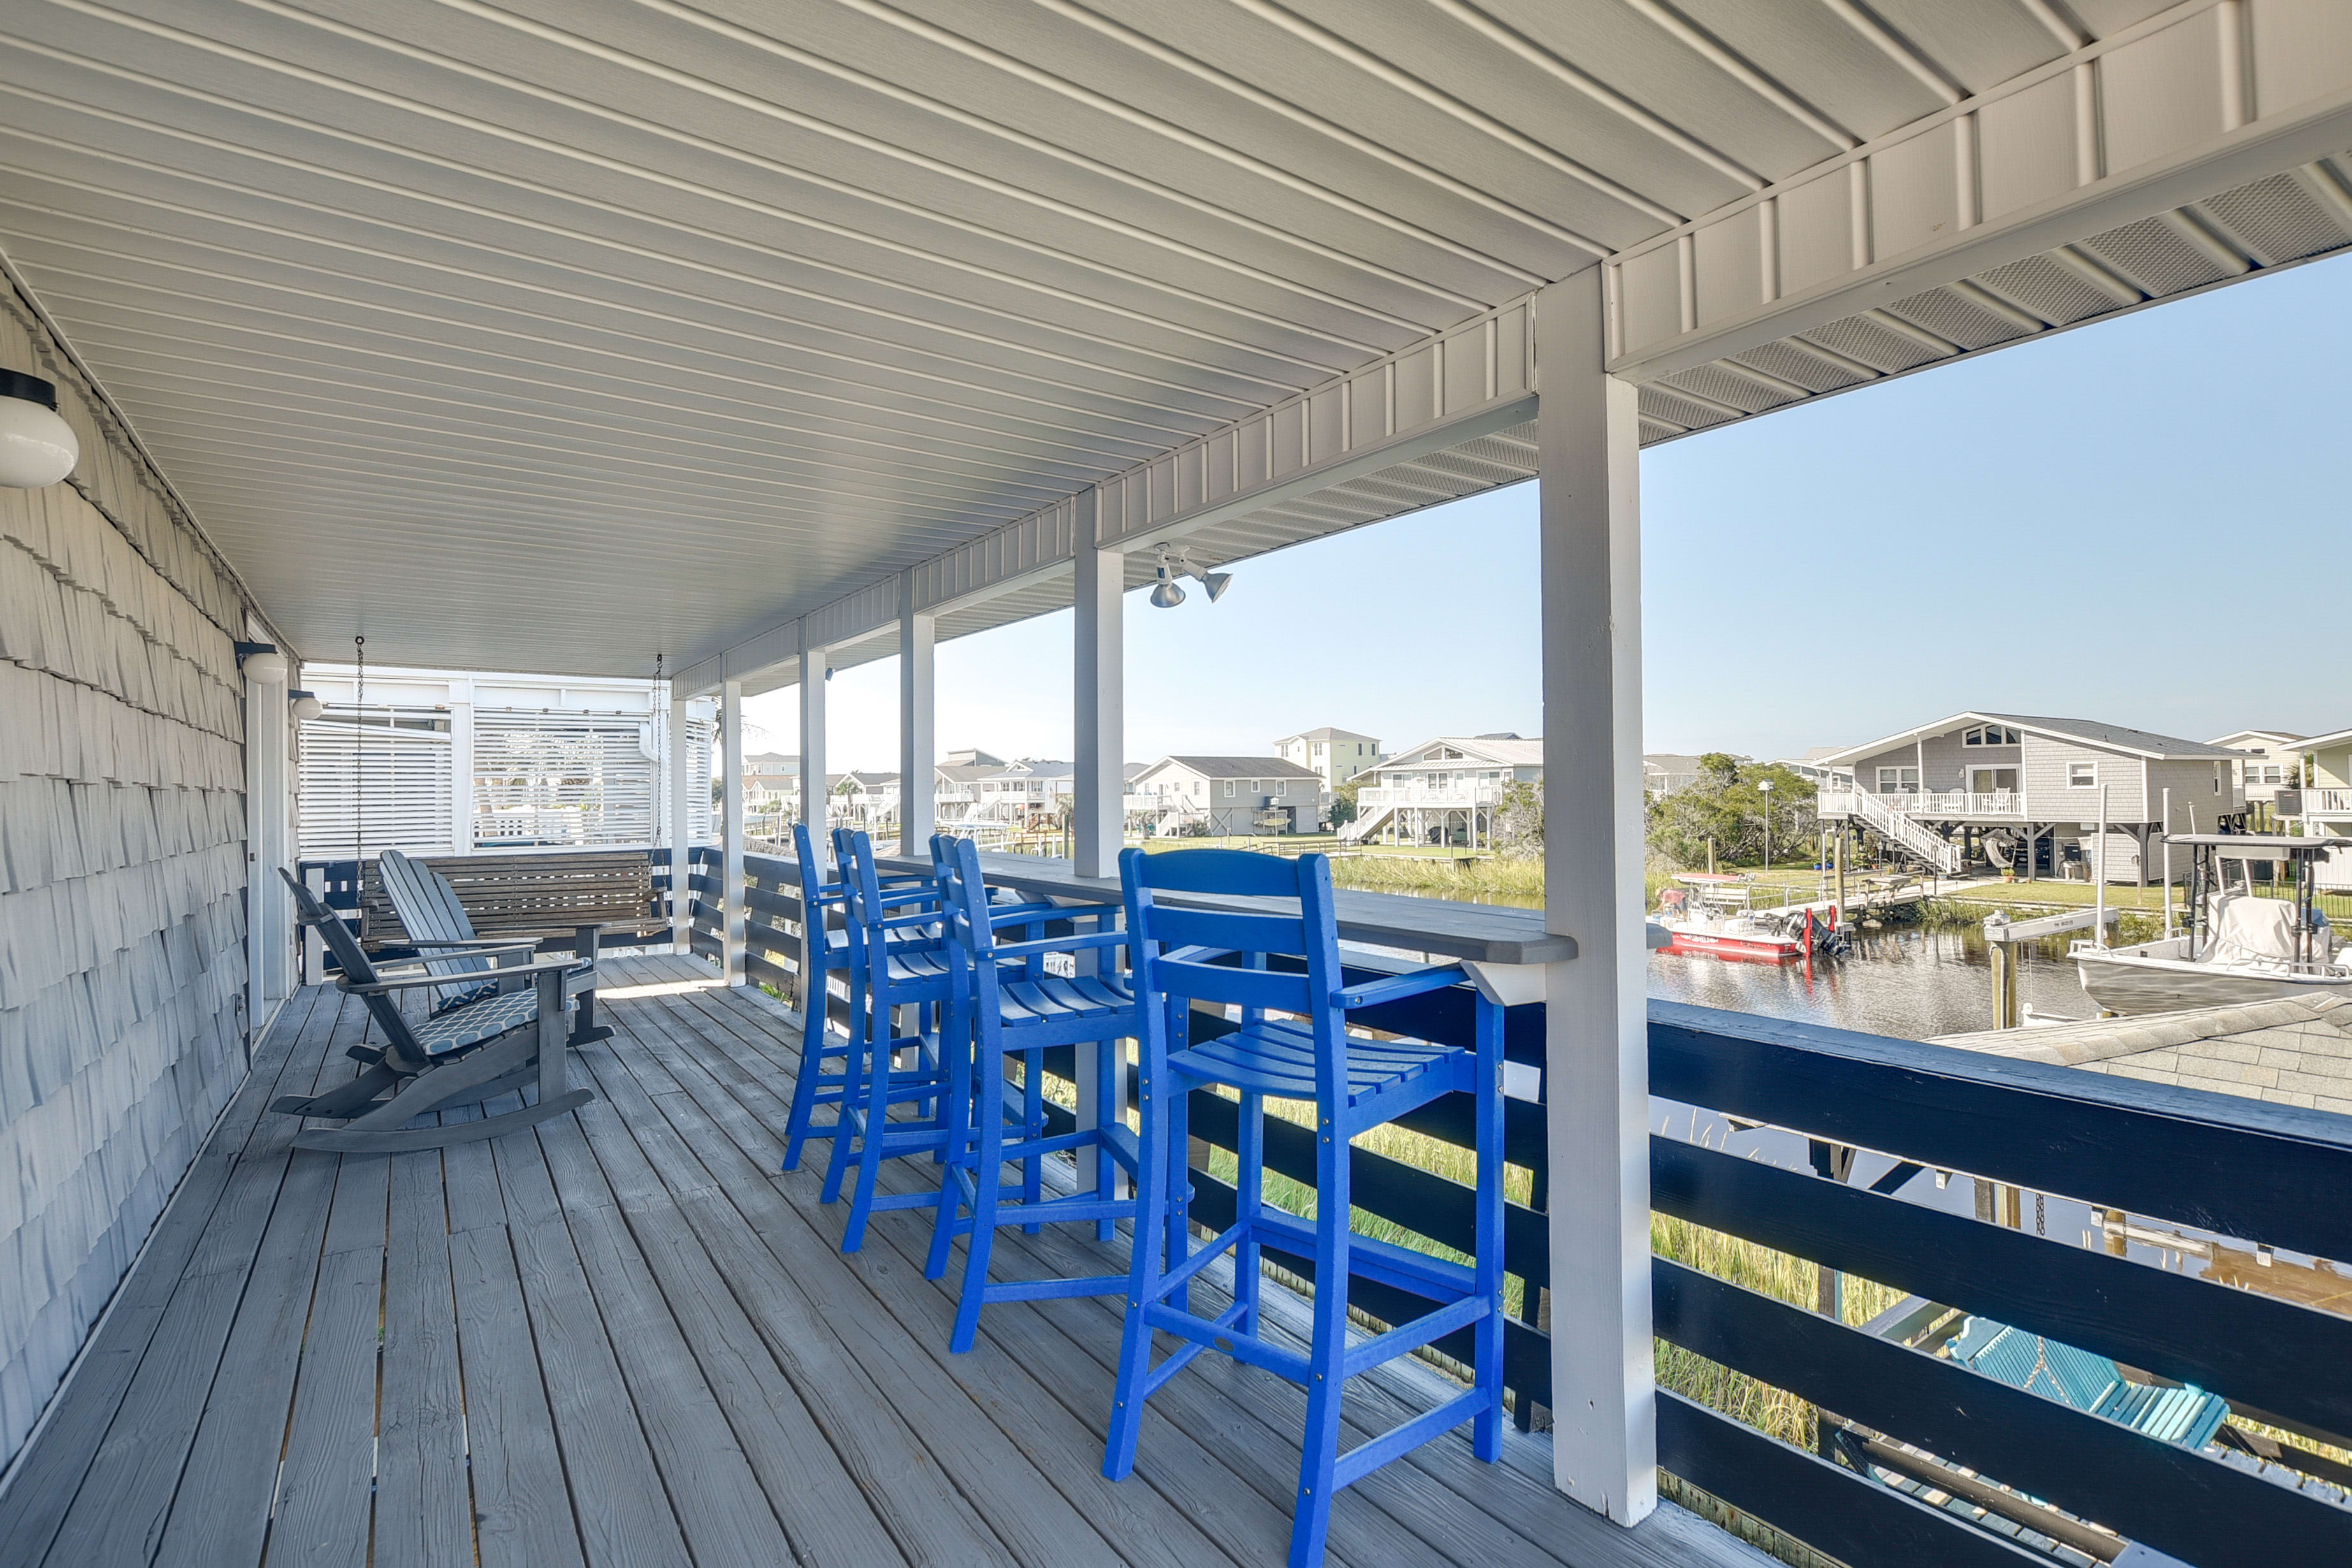 Covered Deck | Porch Swing | Seating | Water Views